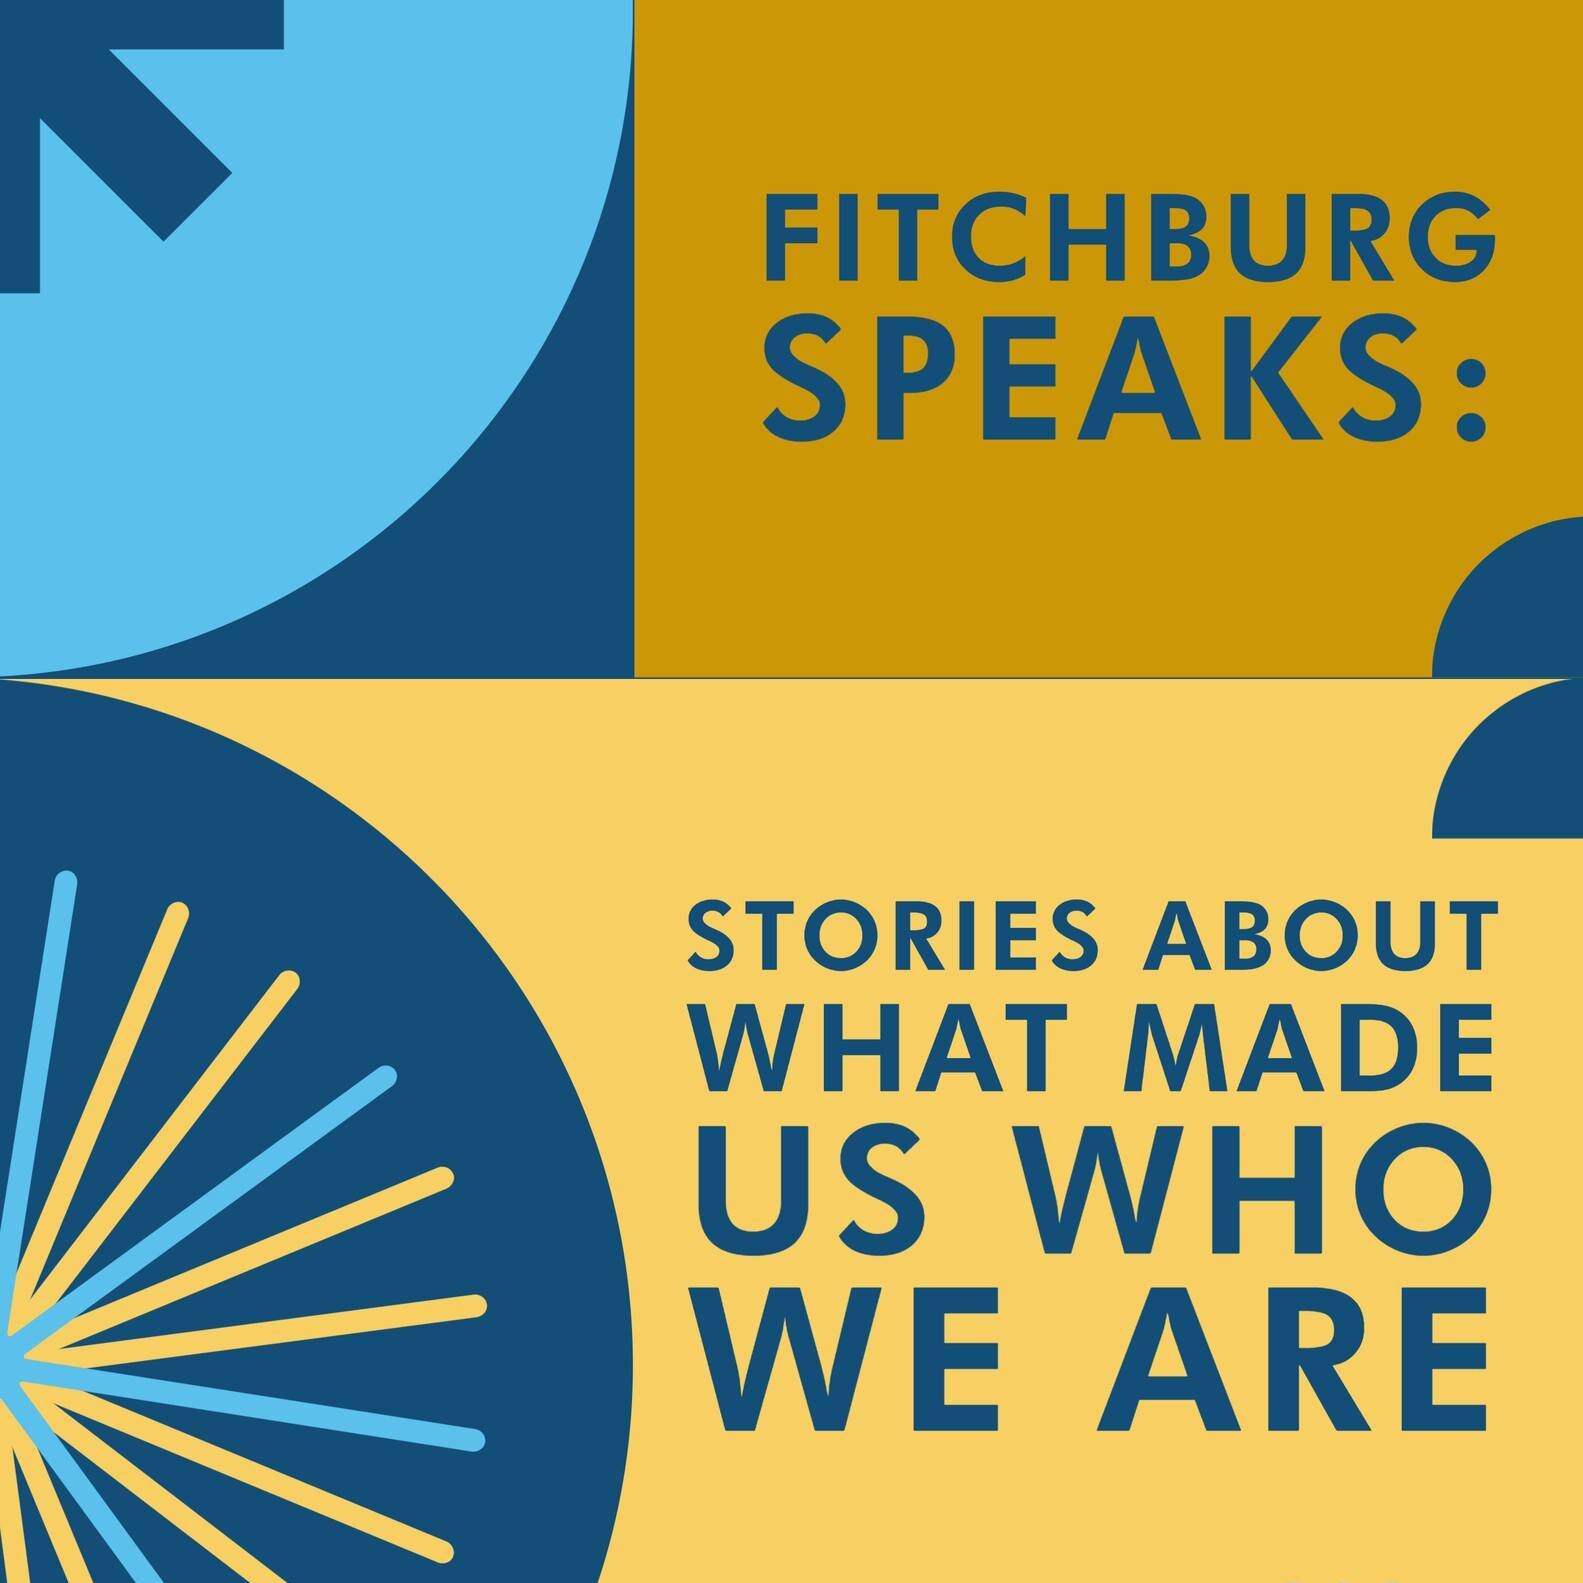 Today's the day! Join us at 3:30 PM in the FalconHub to hear our storytellers. Can't wait to see you there!